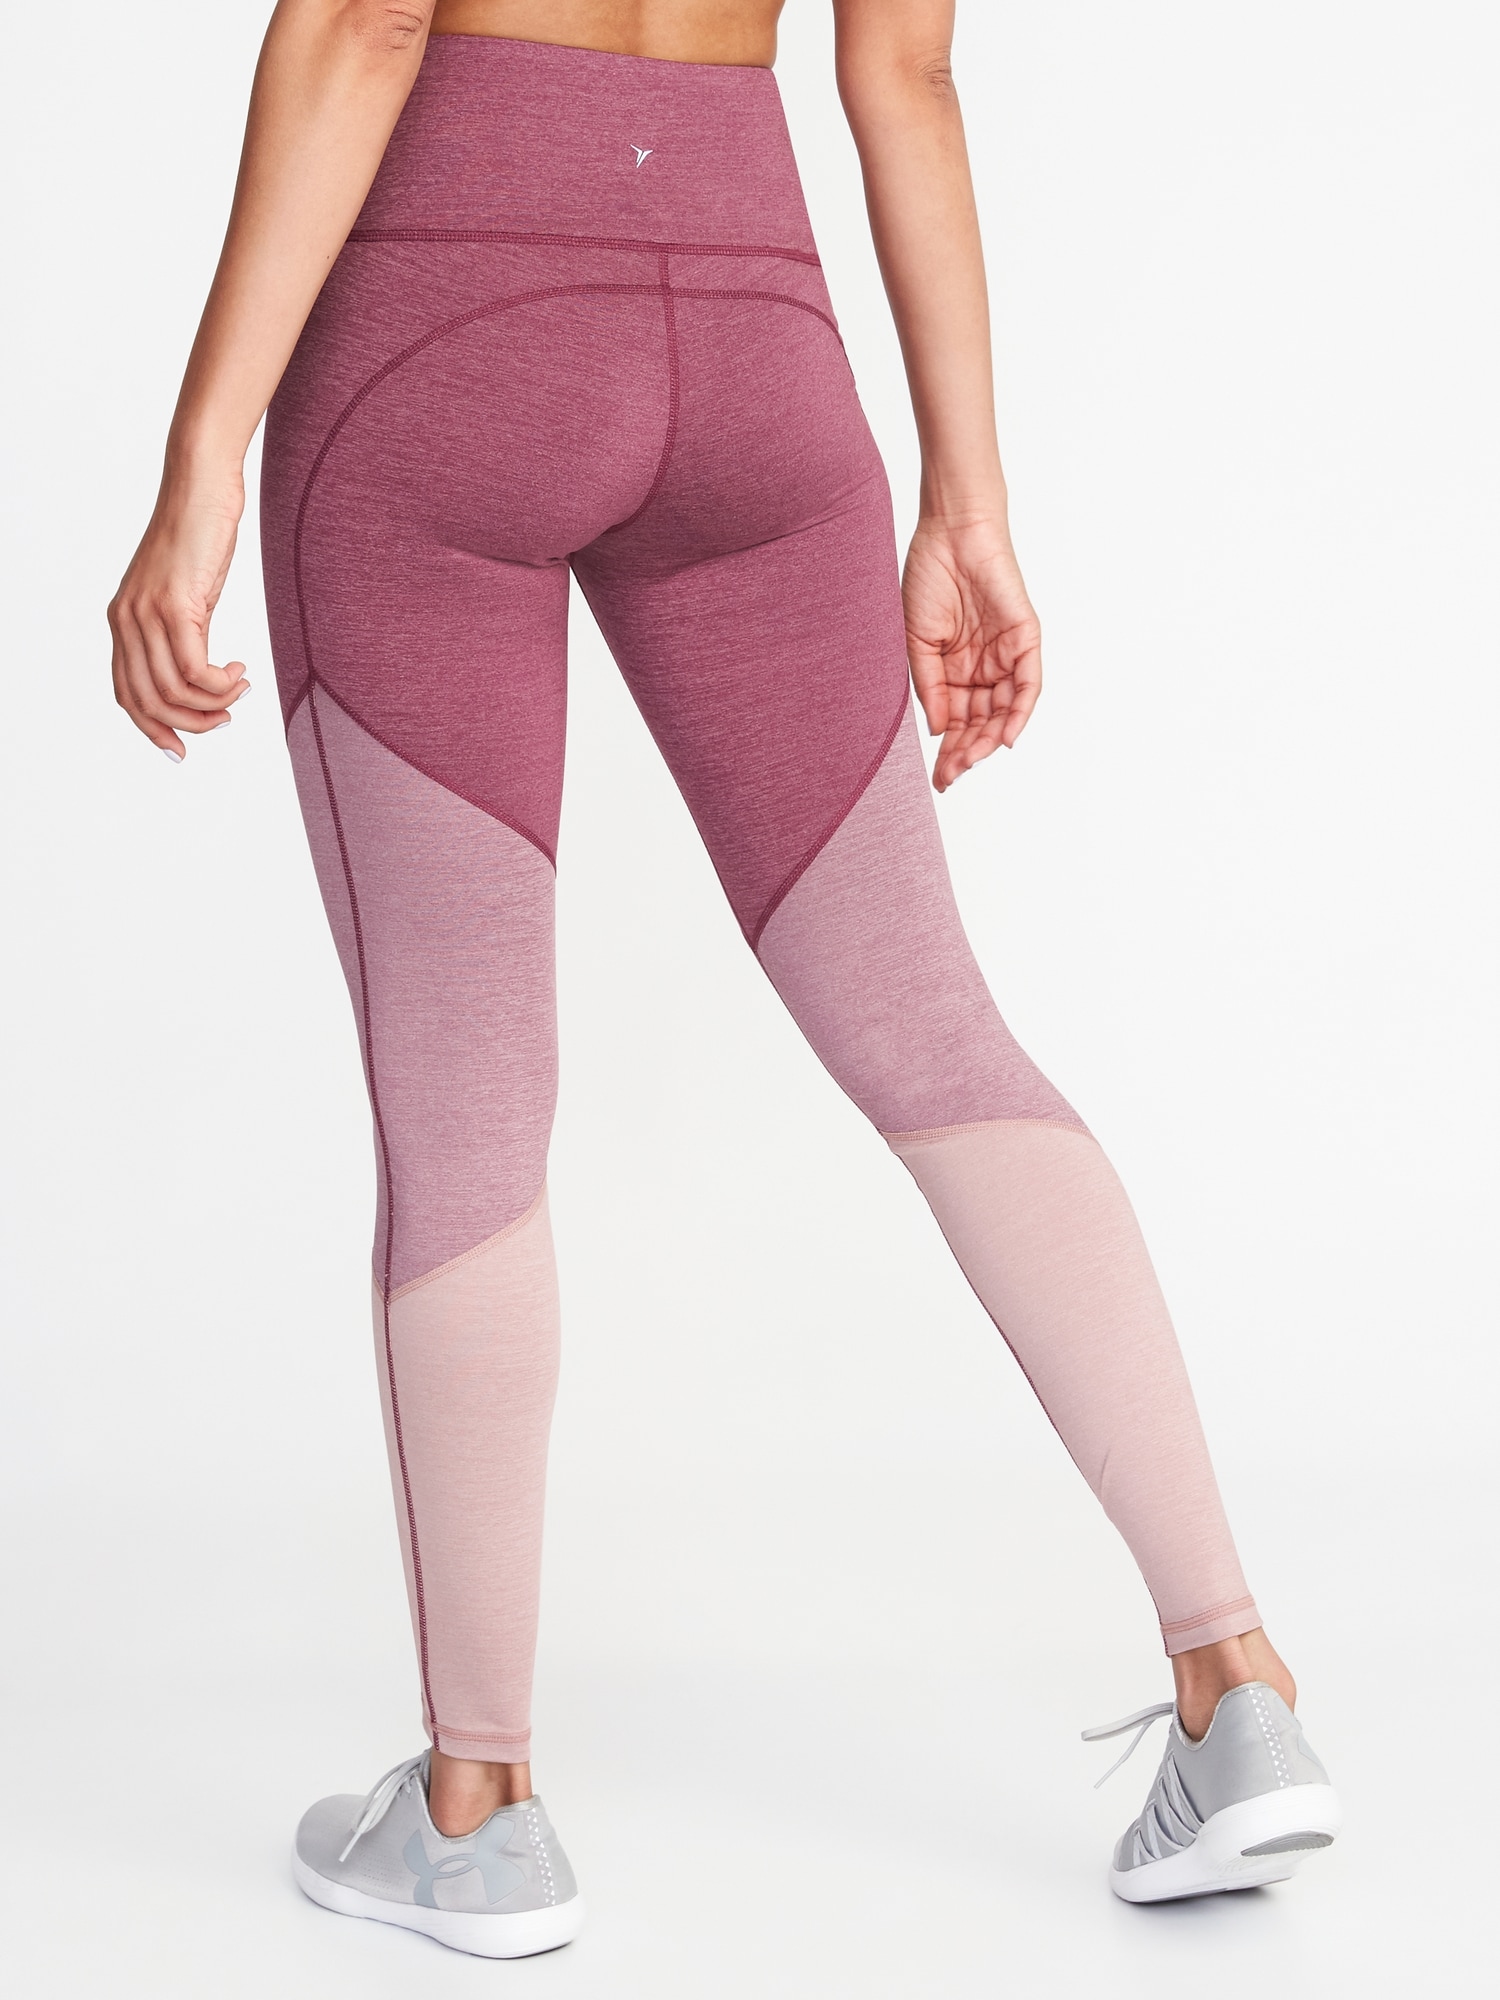 High-Waisted Elevate Color-Block Compression Leggings For Women